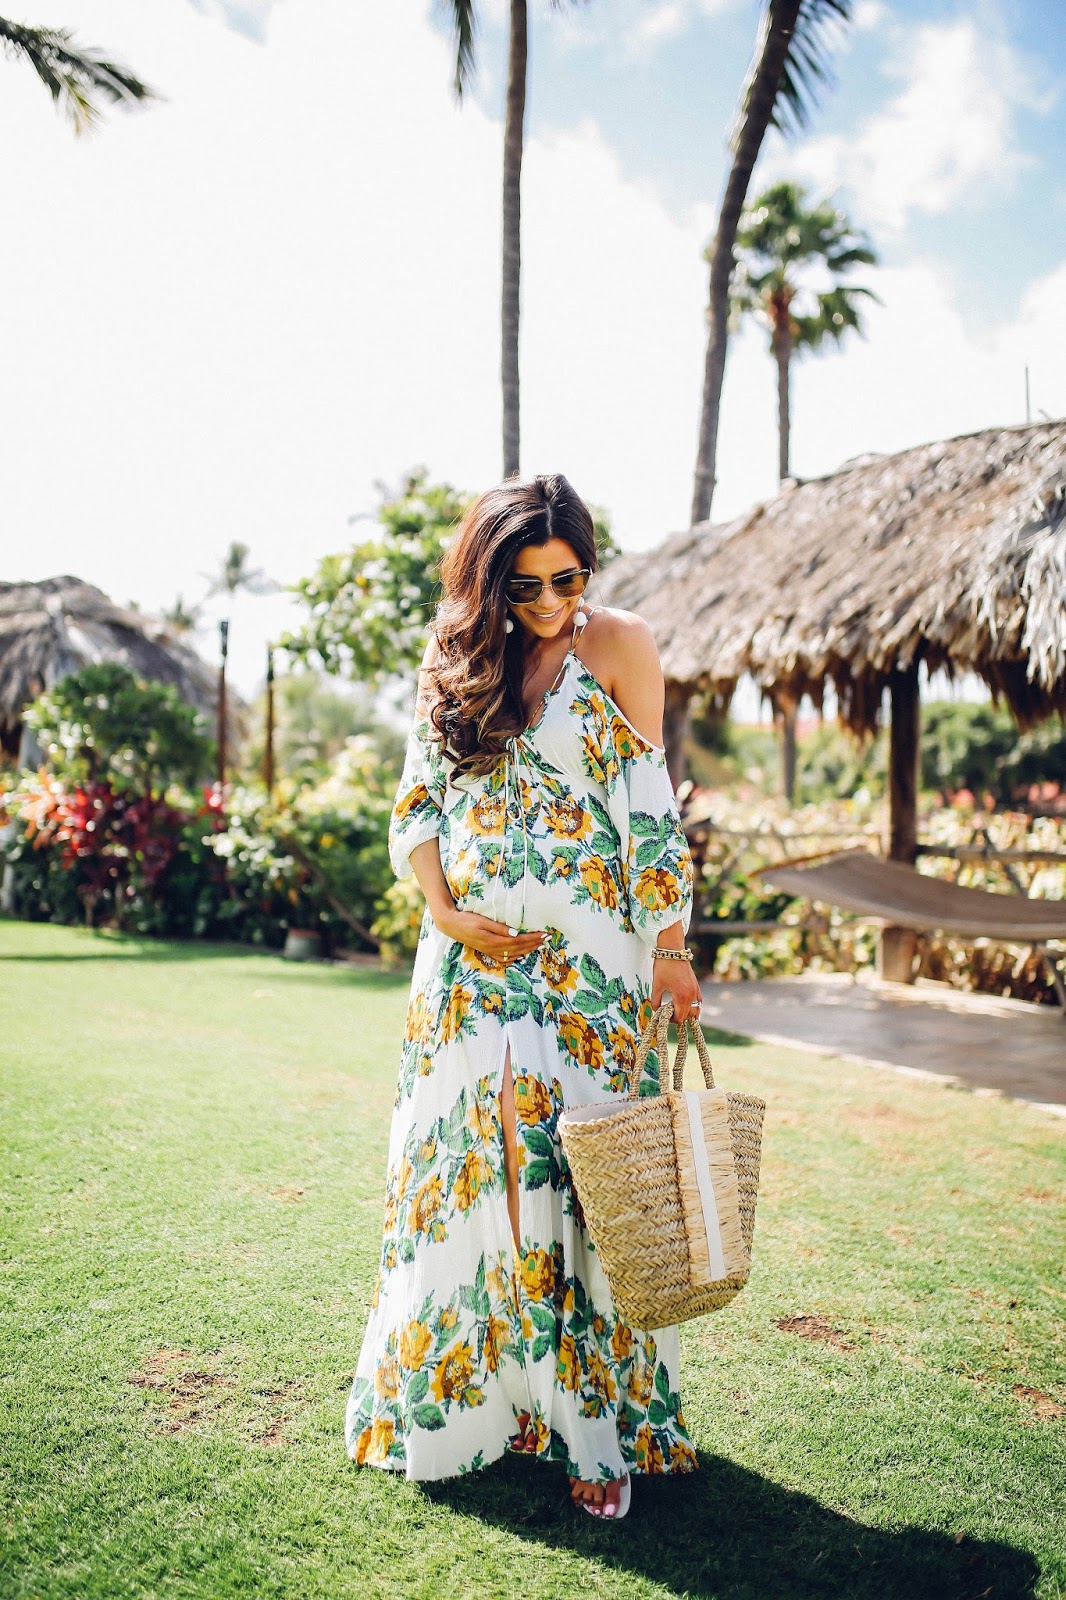 Floral Maxi Dress in Maui | The Sweetest Thing